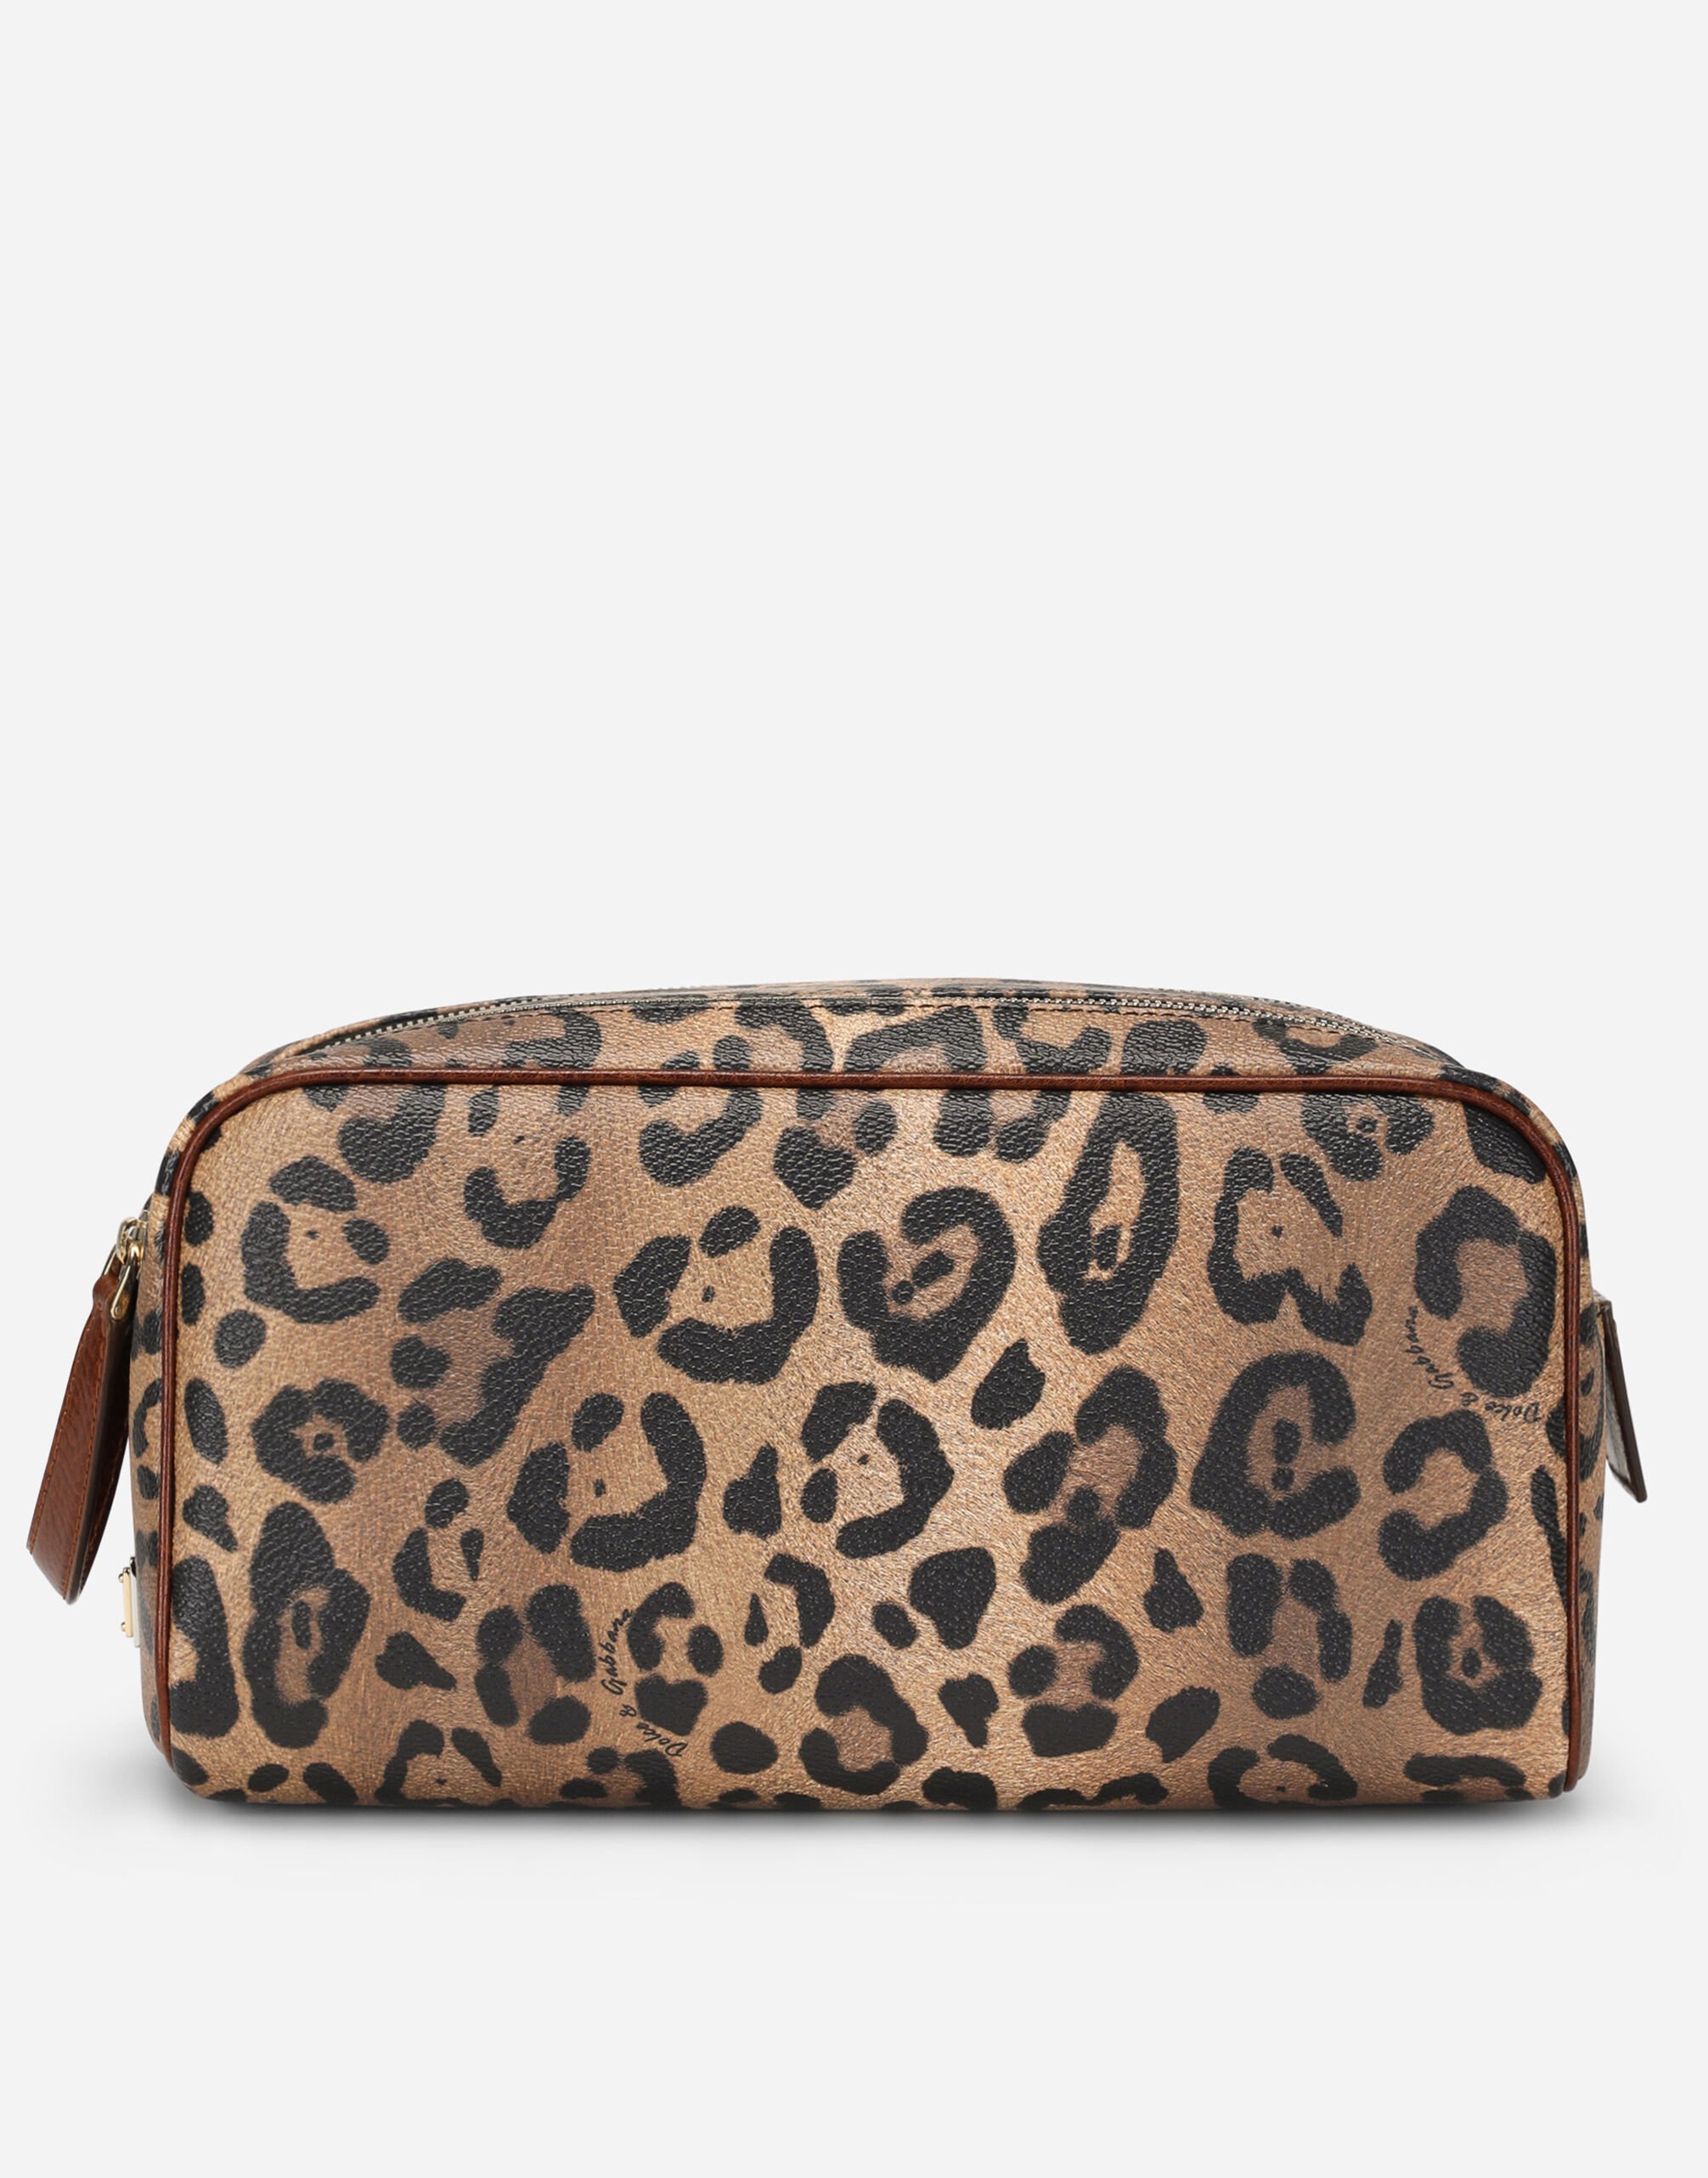 Dolce & Gabbana Leopard-print Crespo toiletry bag with branded plate Multicolor BB2206AW384